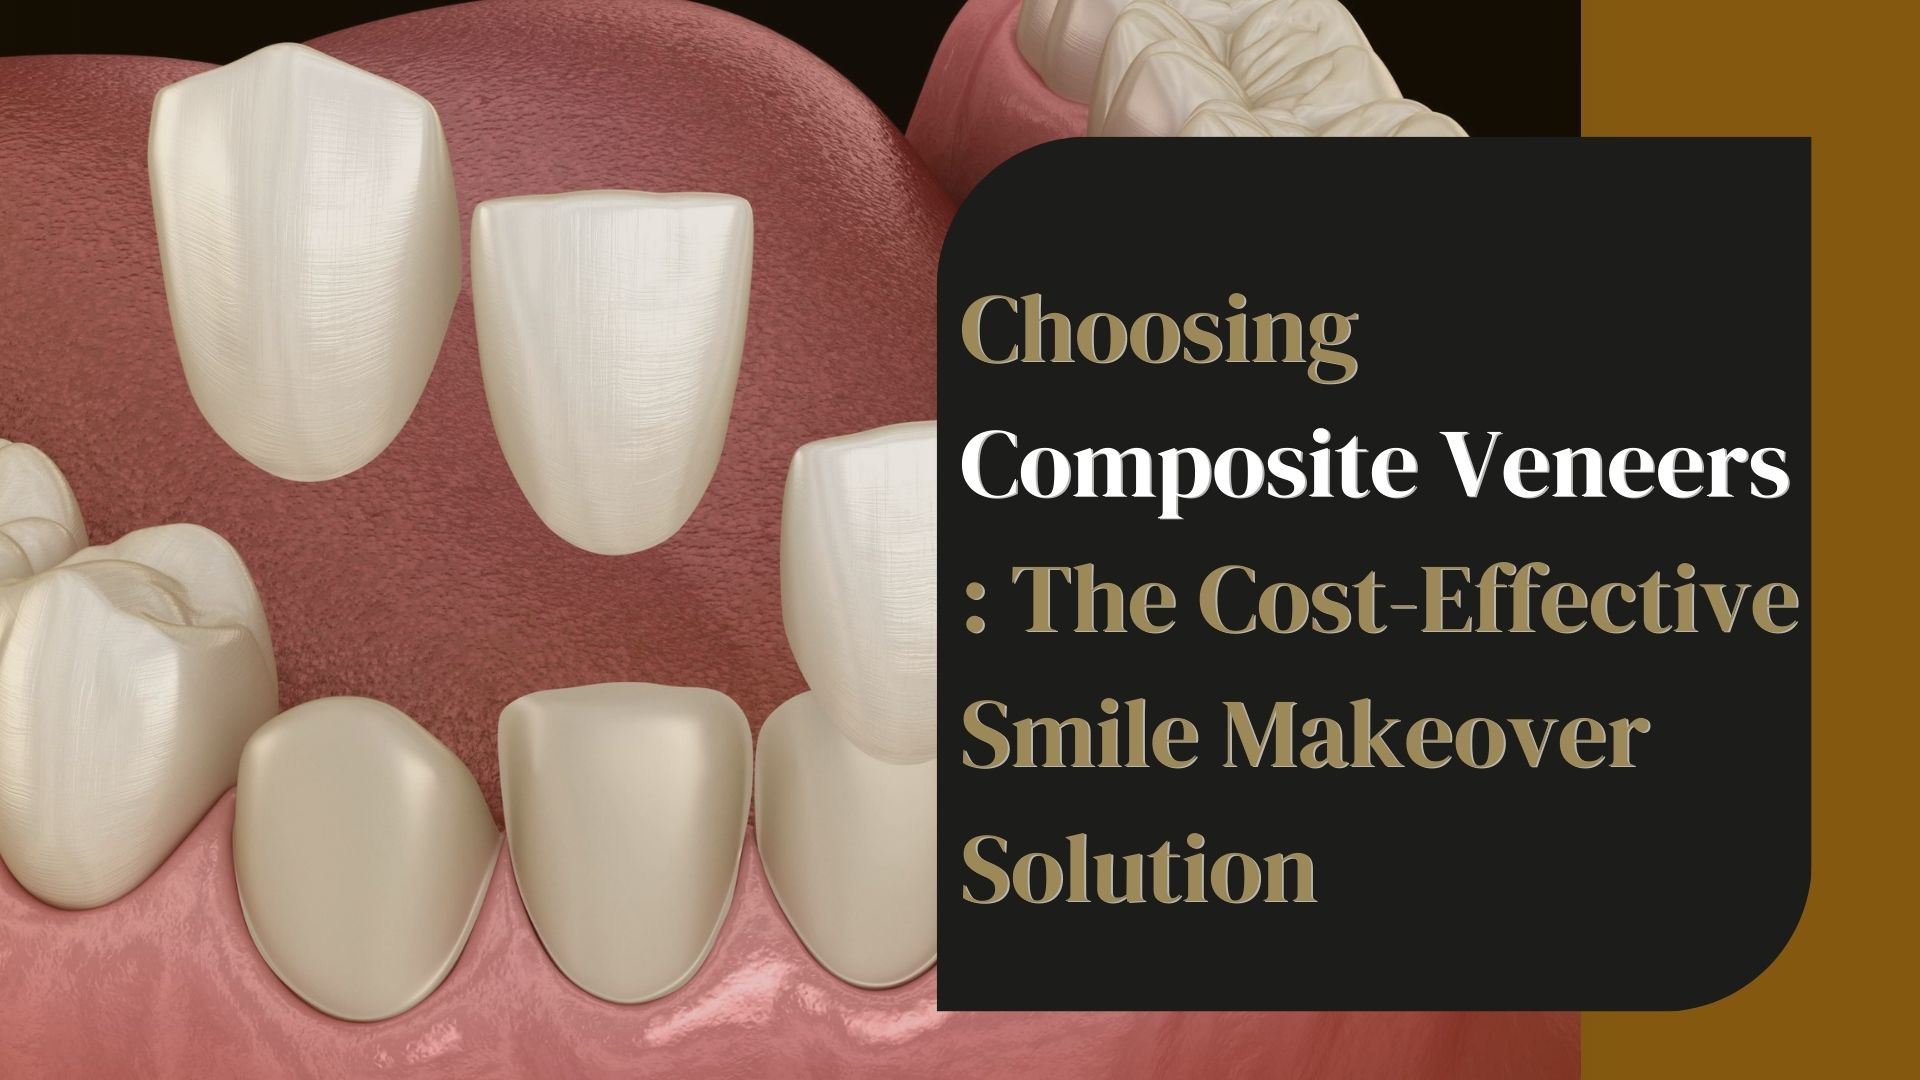 Choosing Composite Veneers: The Cost-Effective Smile Makeover Solution